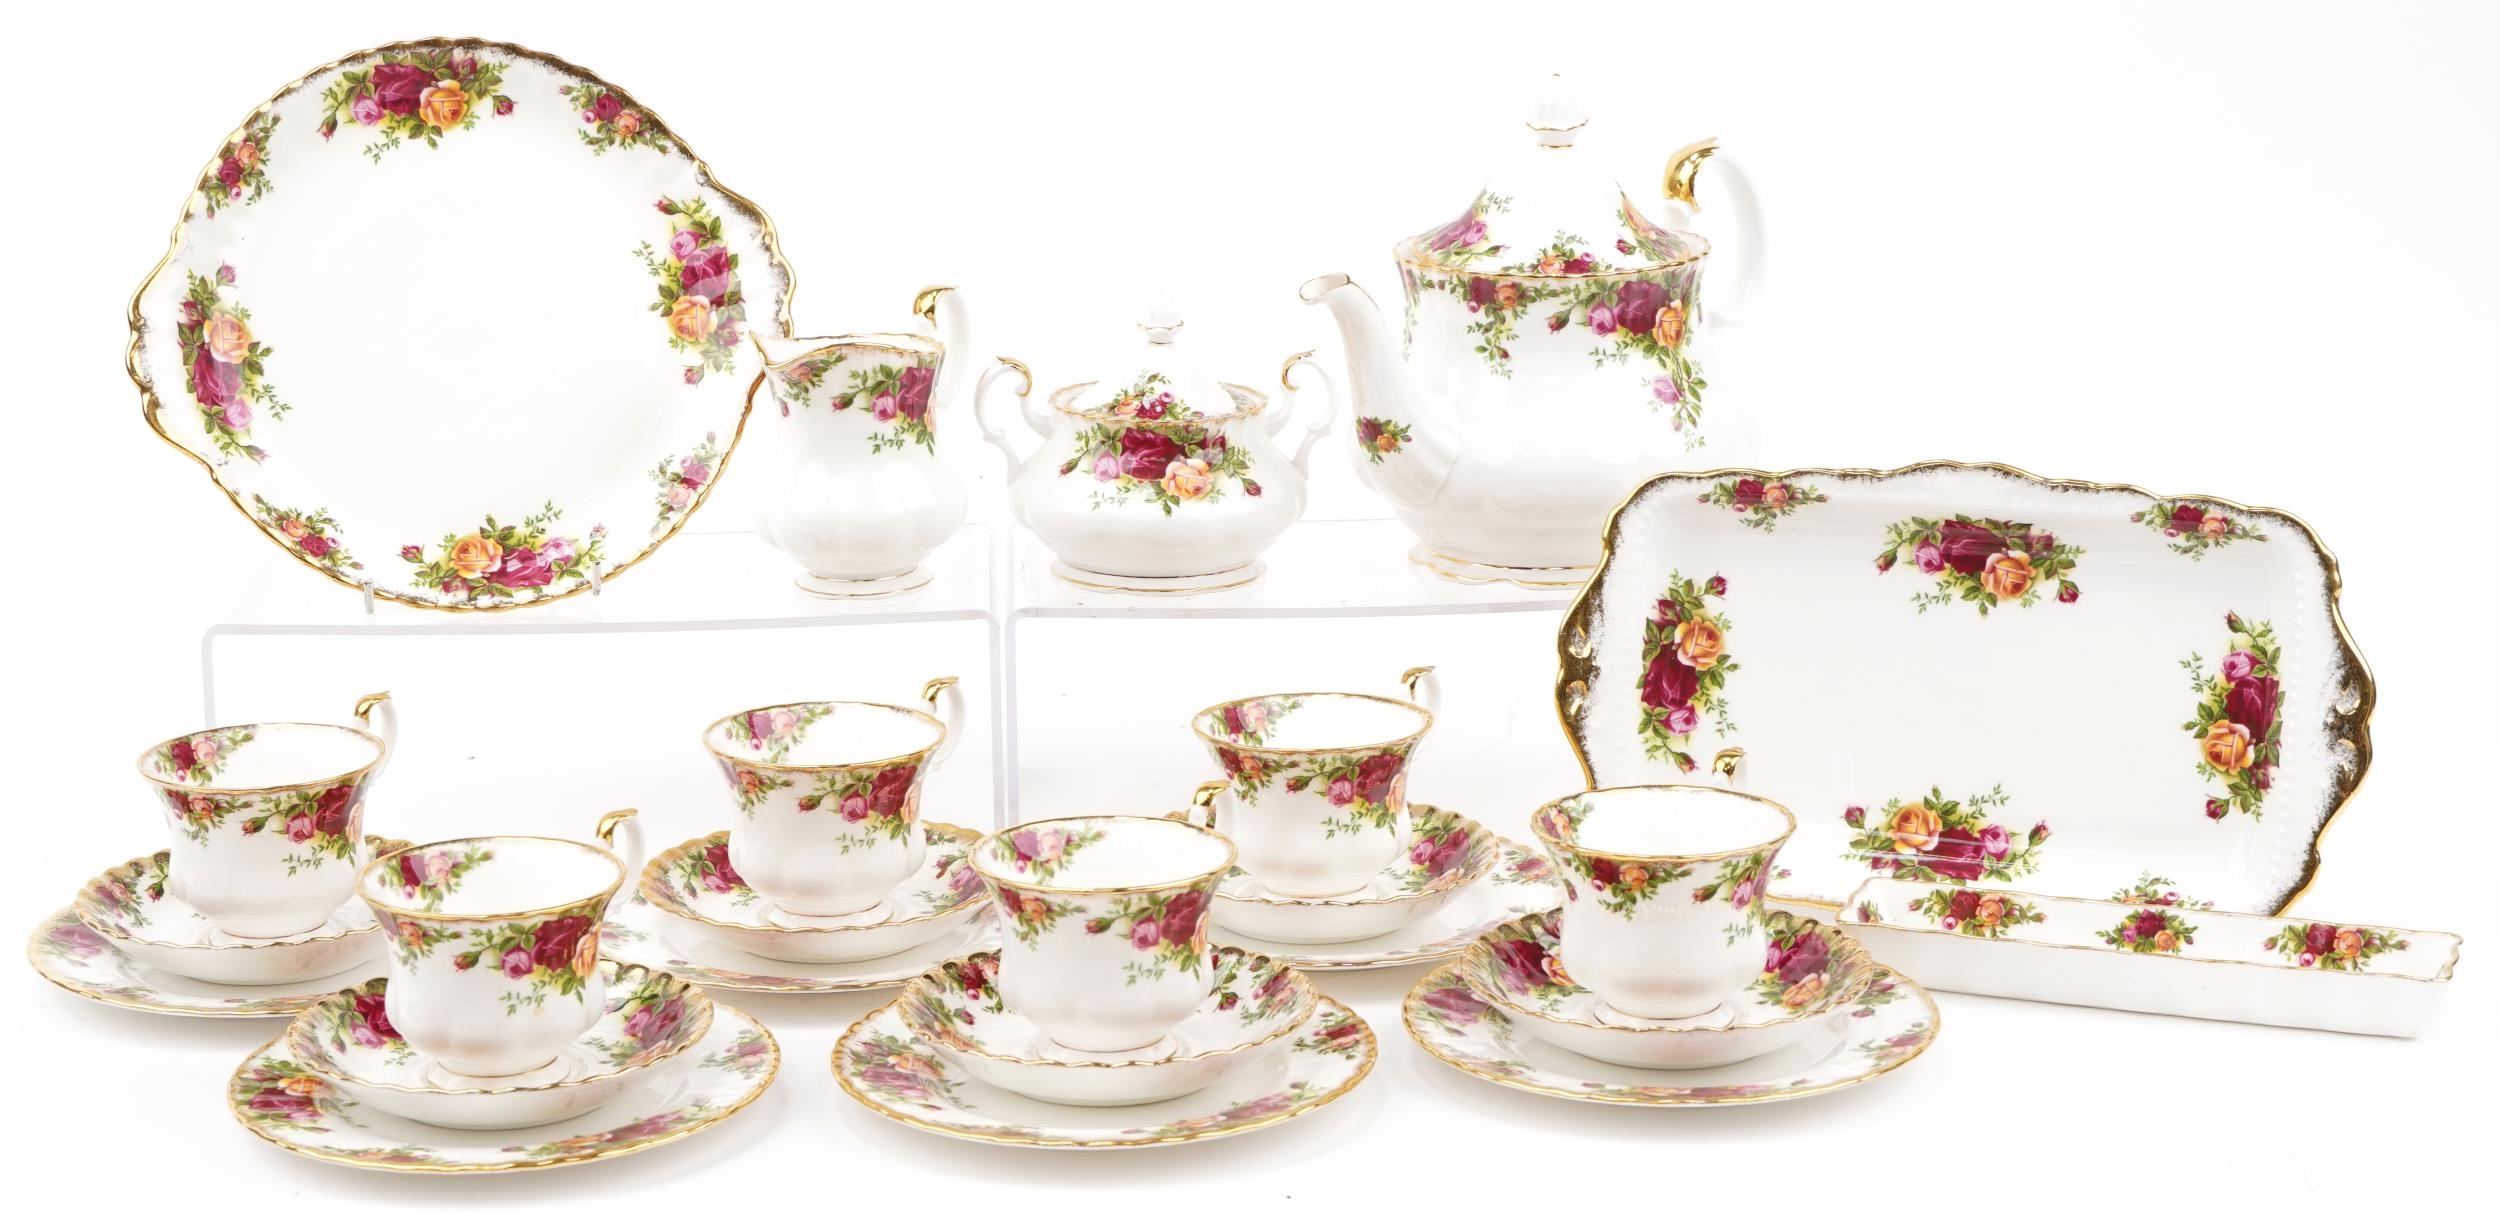 Royal Albert Old Country Roses six place tea service with teapot, lidded sugar bowl and milk jug, - Image 2 of 8